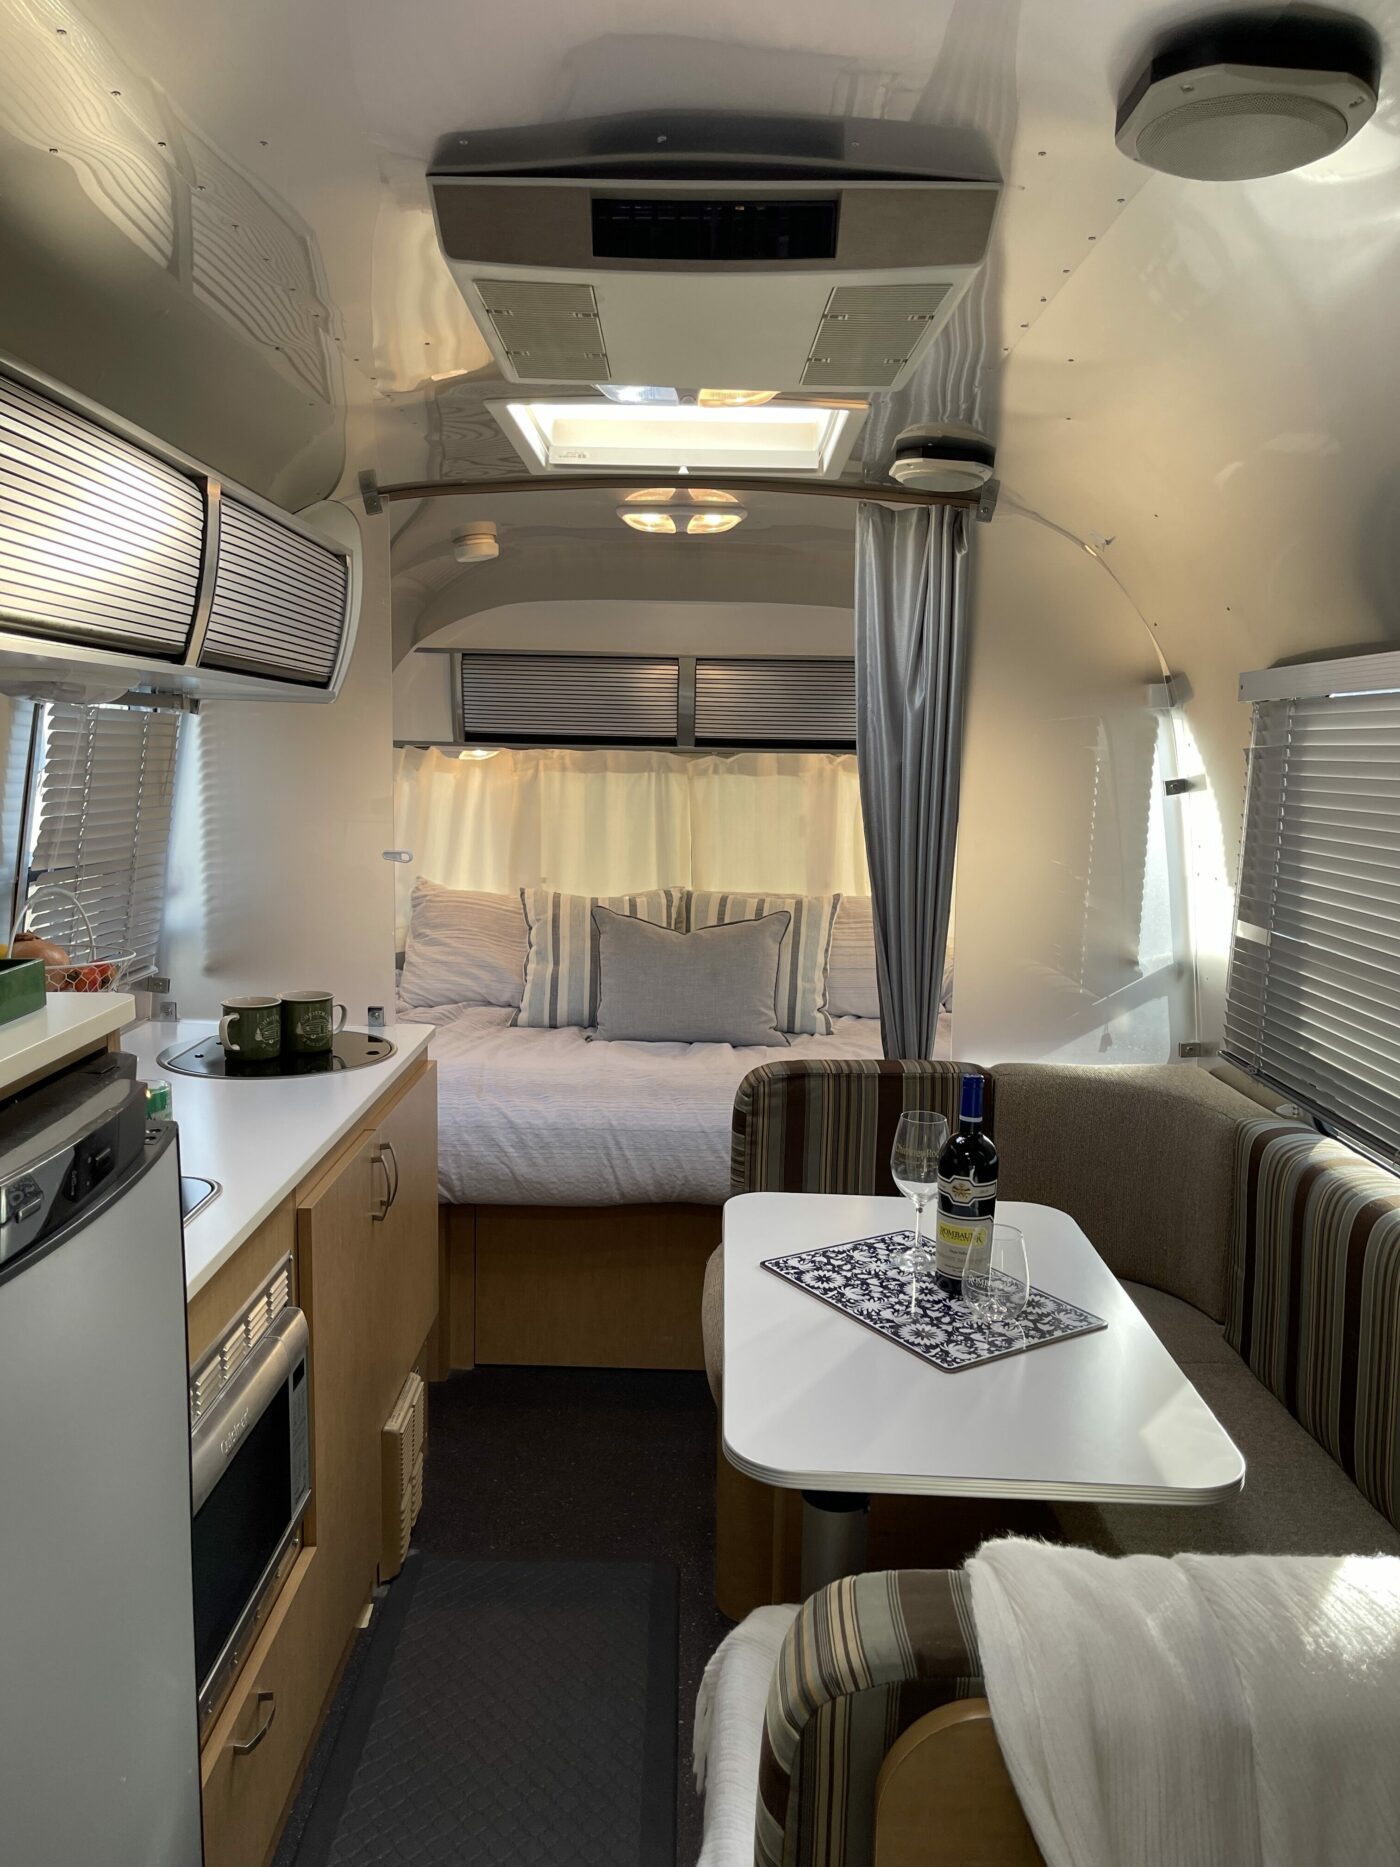 2012 22FT Bambi For Sale In Brentwood, California - Airstream Marketplace